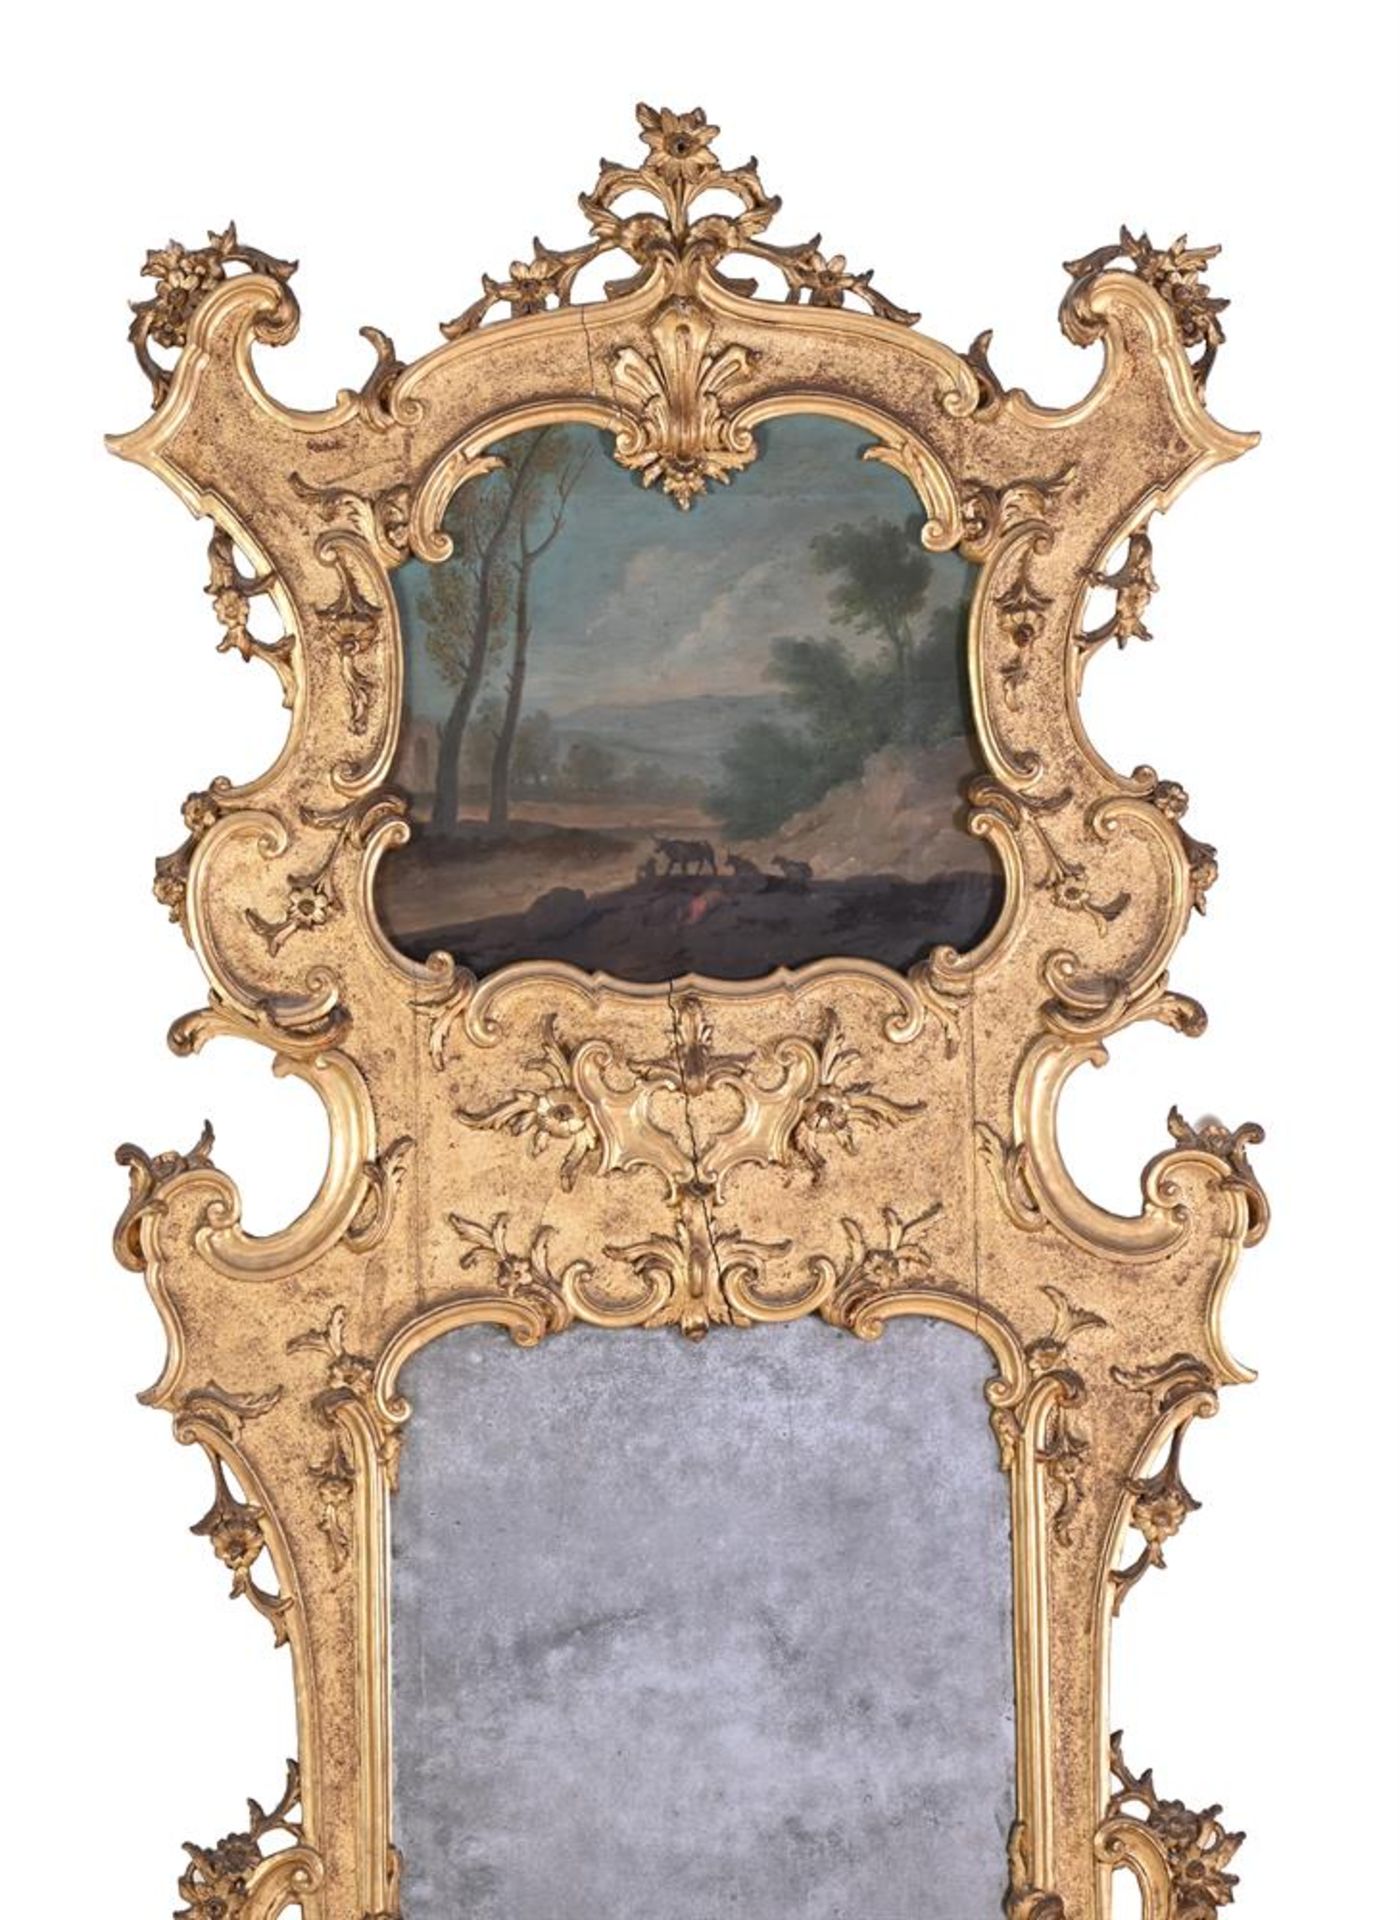 A PAIR OF ITALIAN CARVED GILTWOOD TRUMEAU MIRRORS, 19TH CENTURY - Image 5 of 7